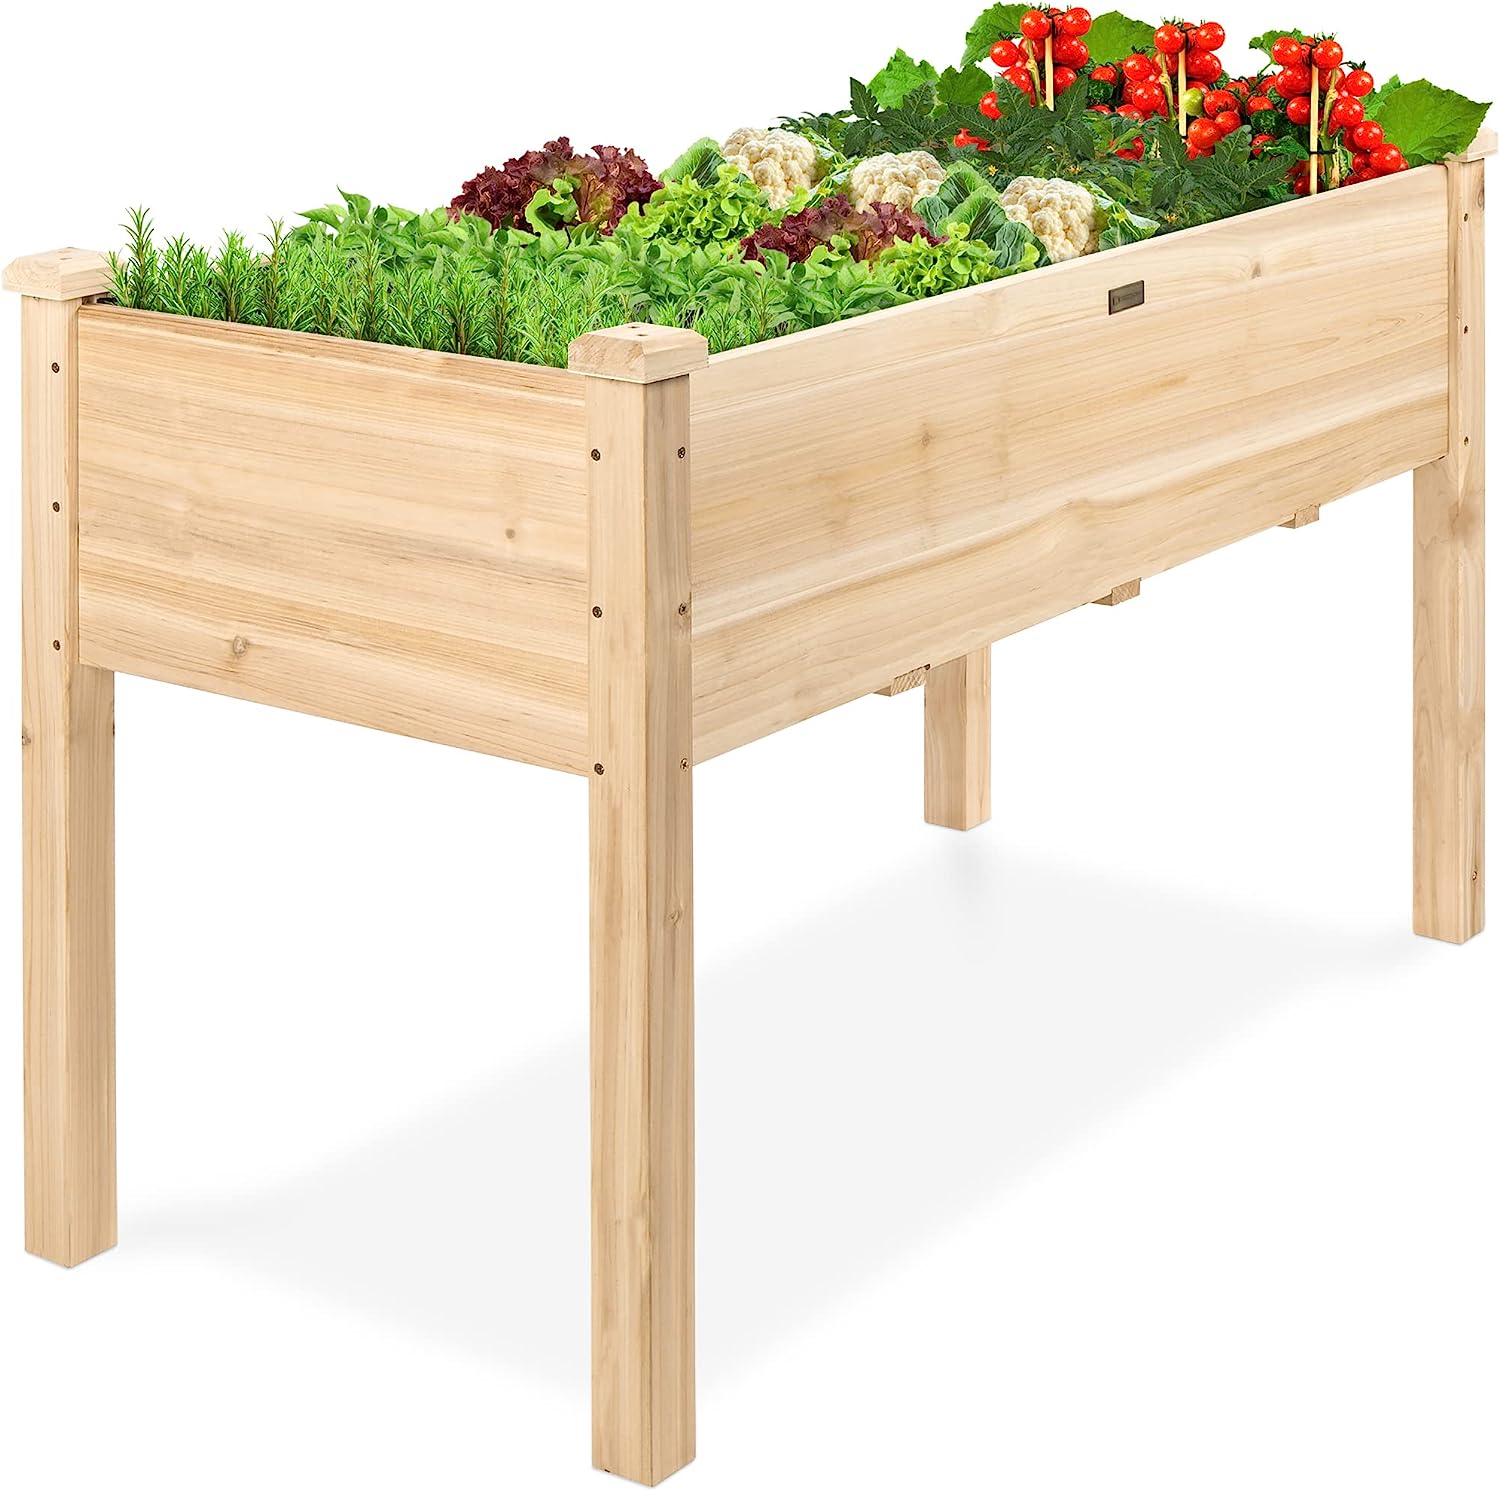 Best Choice Products 48x24x30in Raised Garden Bed, [...]